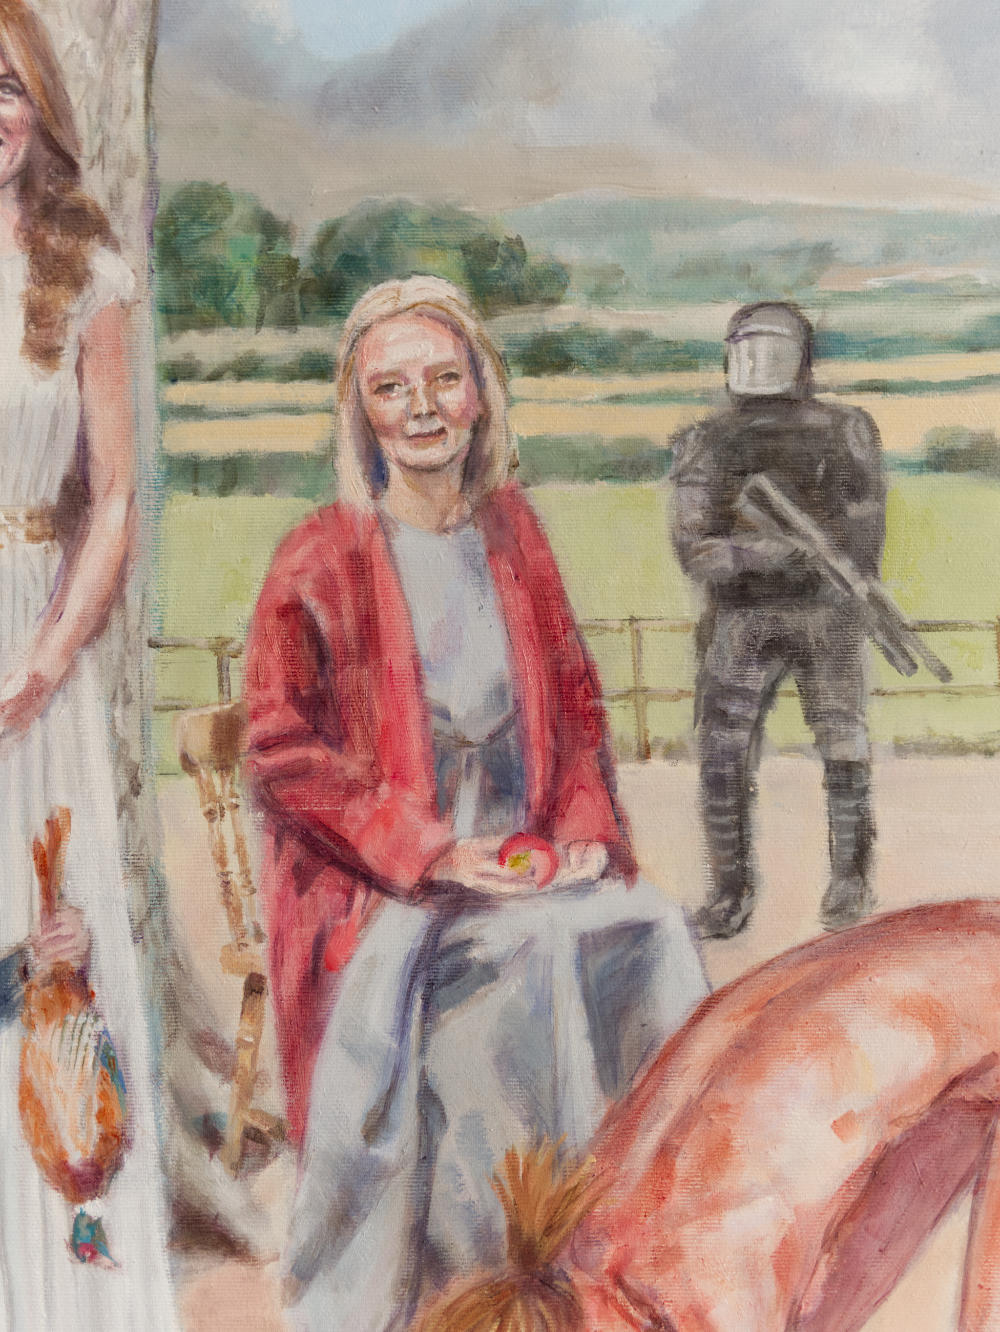 detail from the gleaners, with Liz Truss sitting under a tree